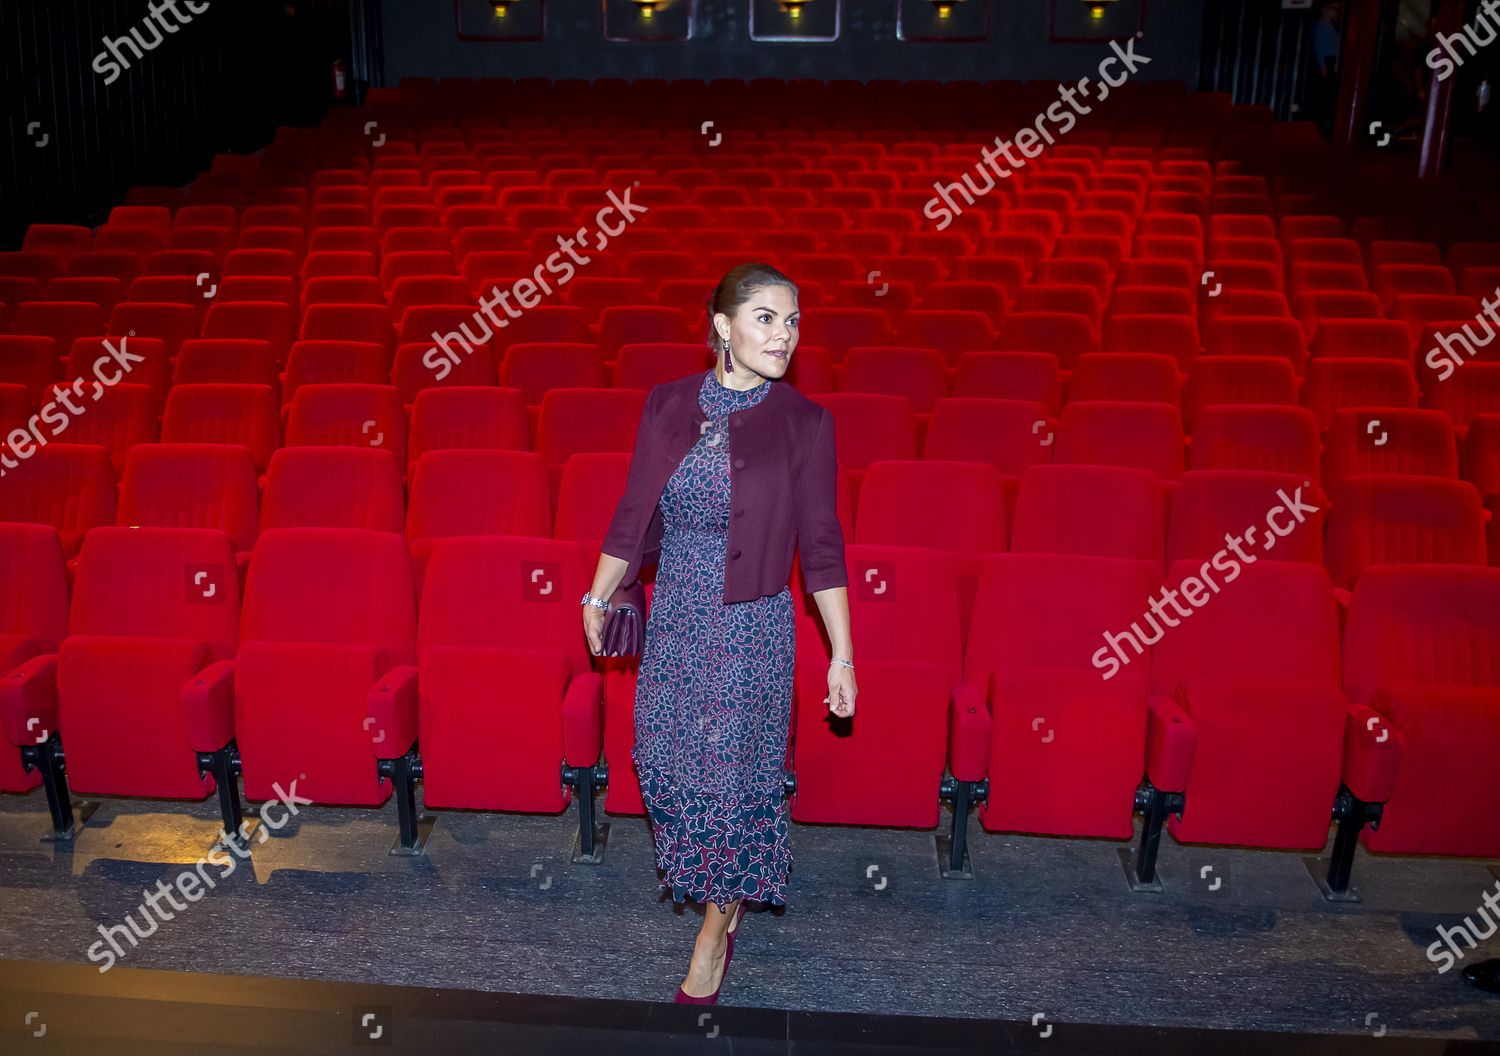 prince-daniel-and-crown-princess-victoria-visit-the-maxim-theater-stockholm-sweden-shutterstock-editorial-10817556i.jpg